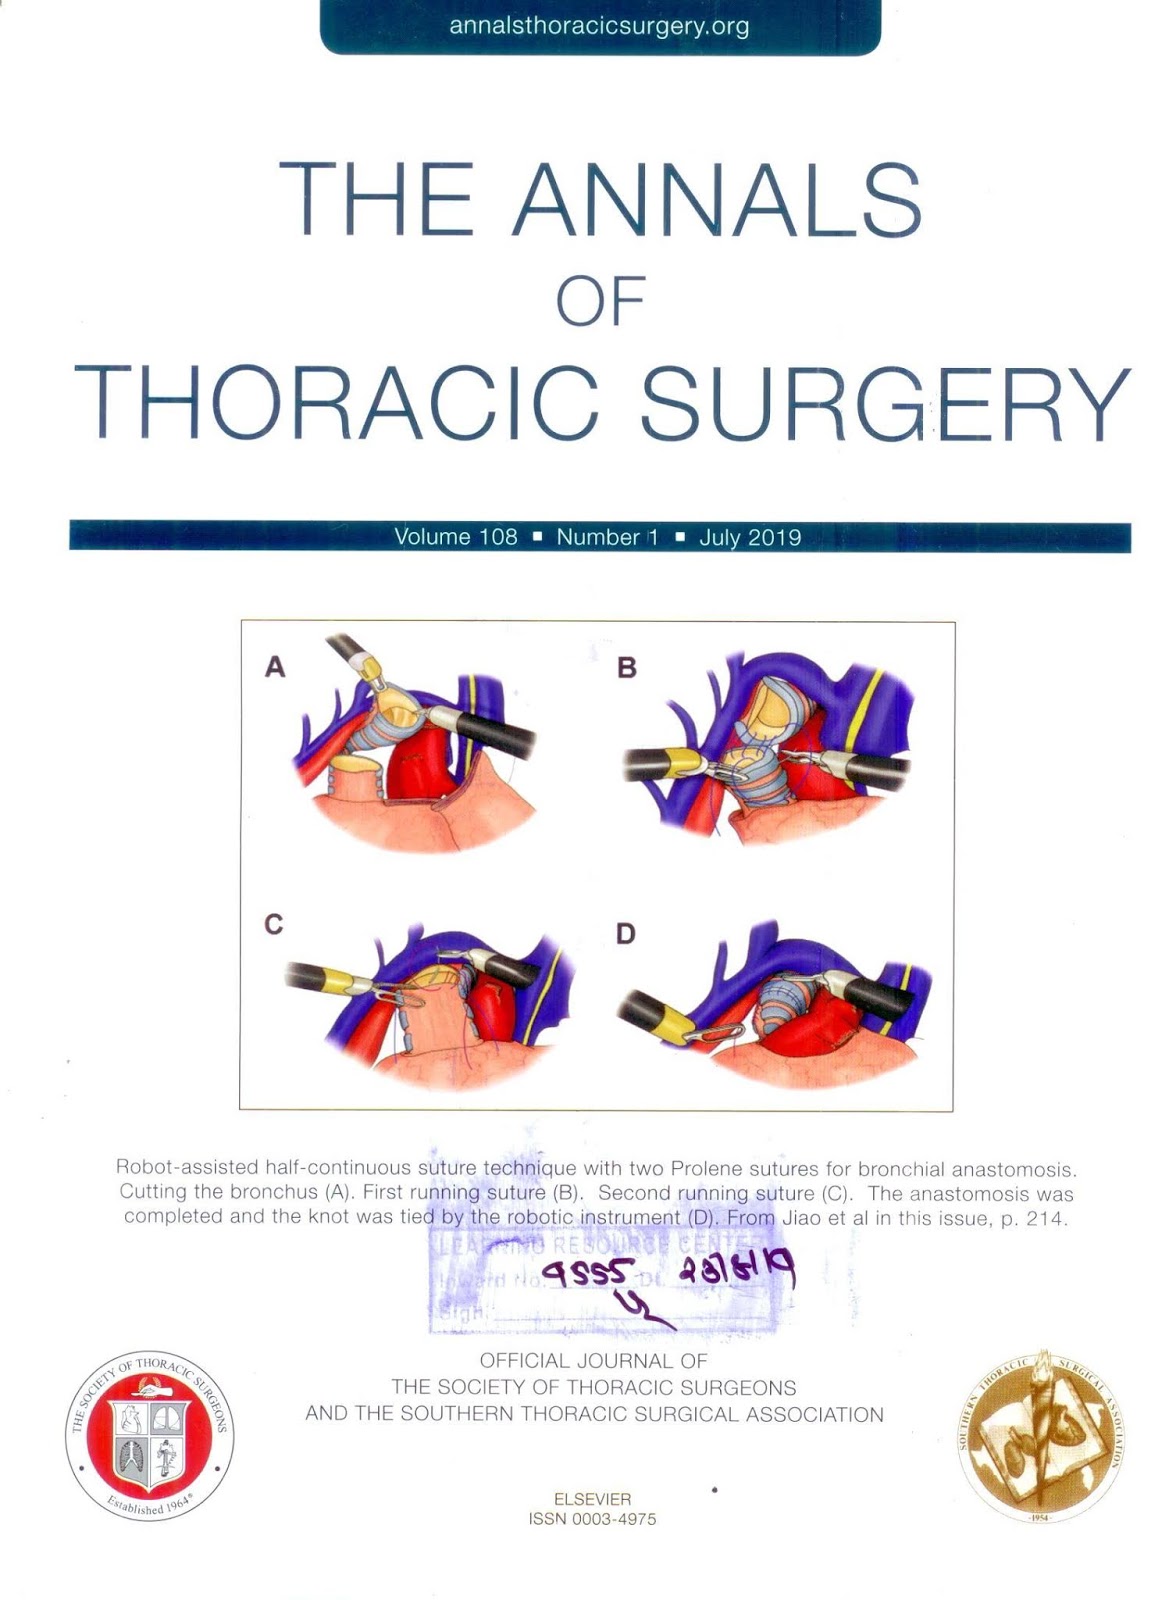 https://www.annalsthoracicsurgery.org/issue/S0003-4975(18)X0018-6